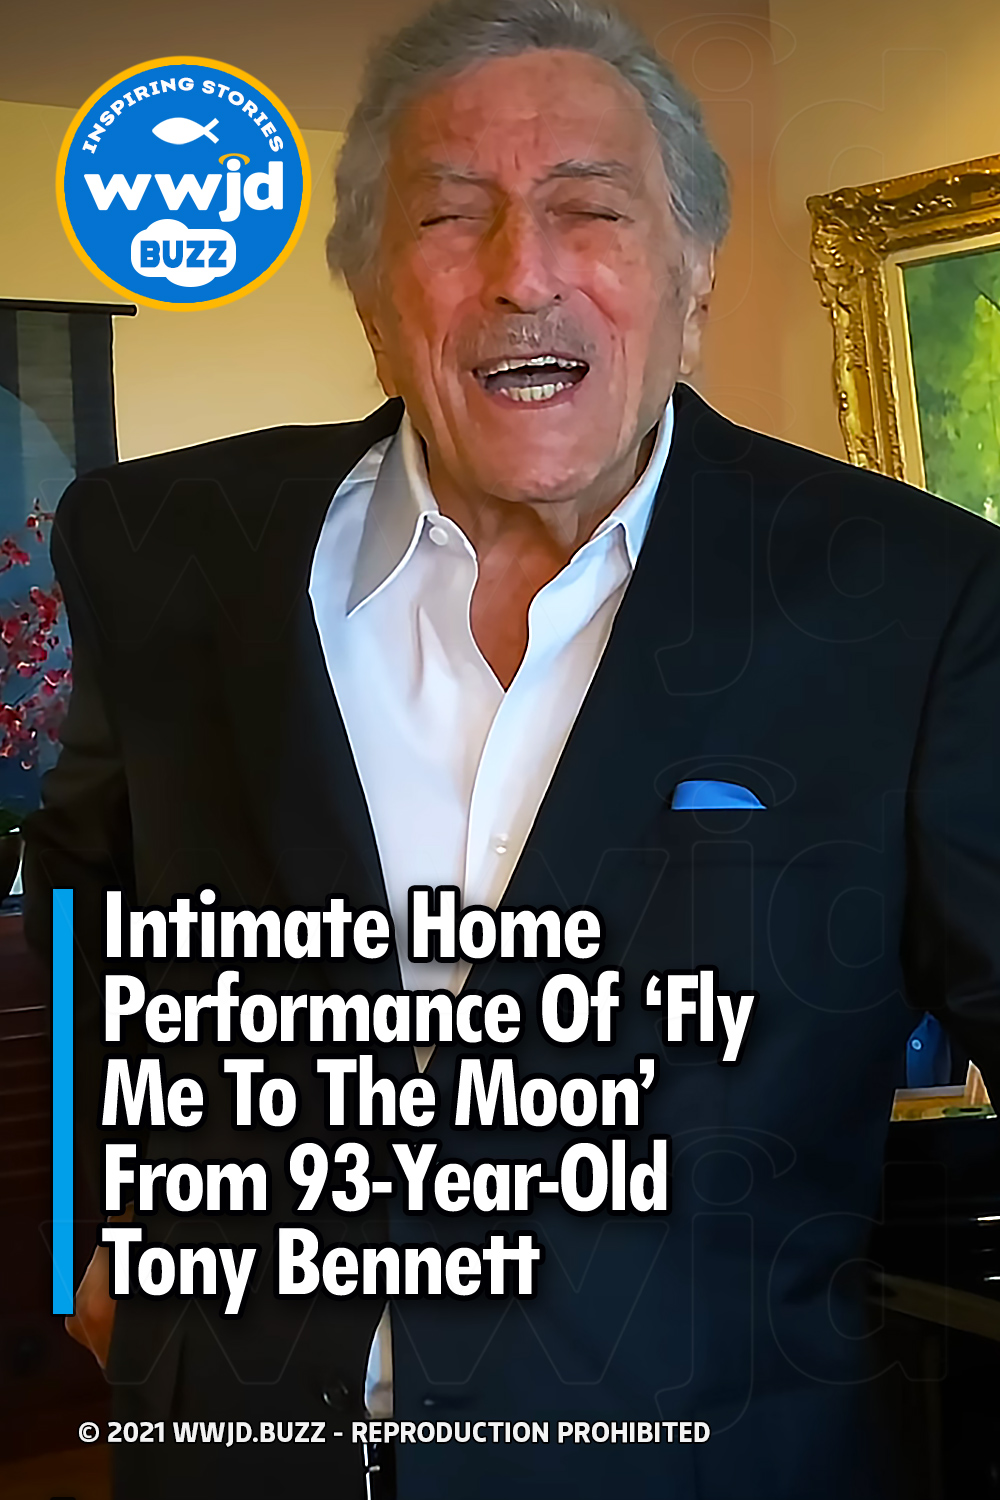 Intimate Home Performance Of ‘Fly Me To The Moon’ From 93-Year-Old Tony Bennett